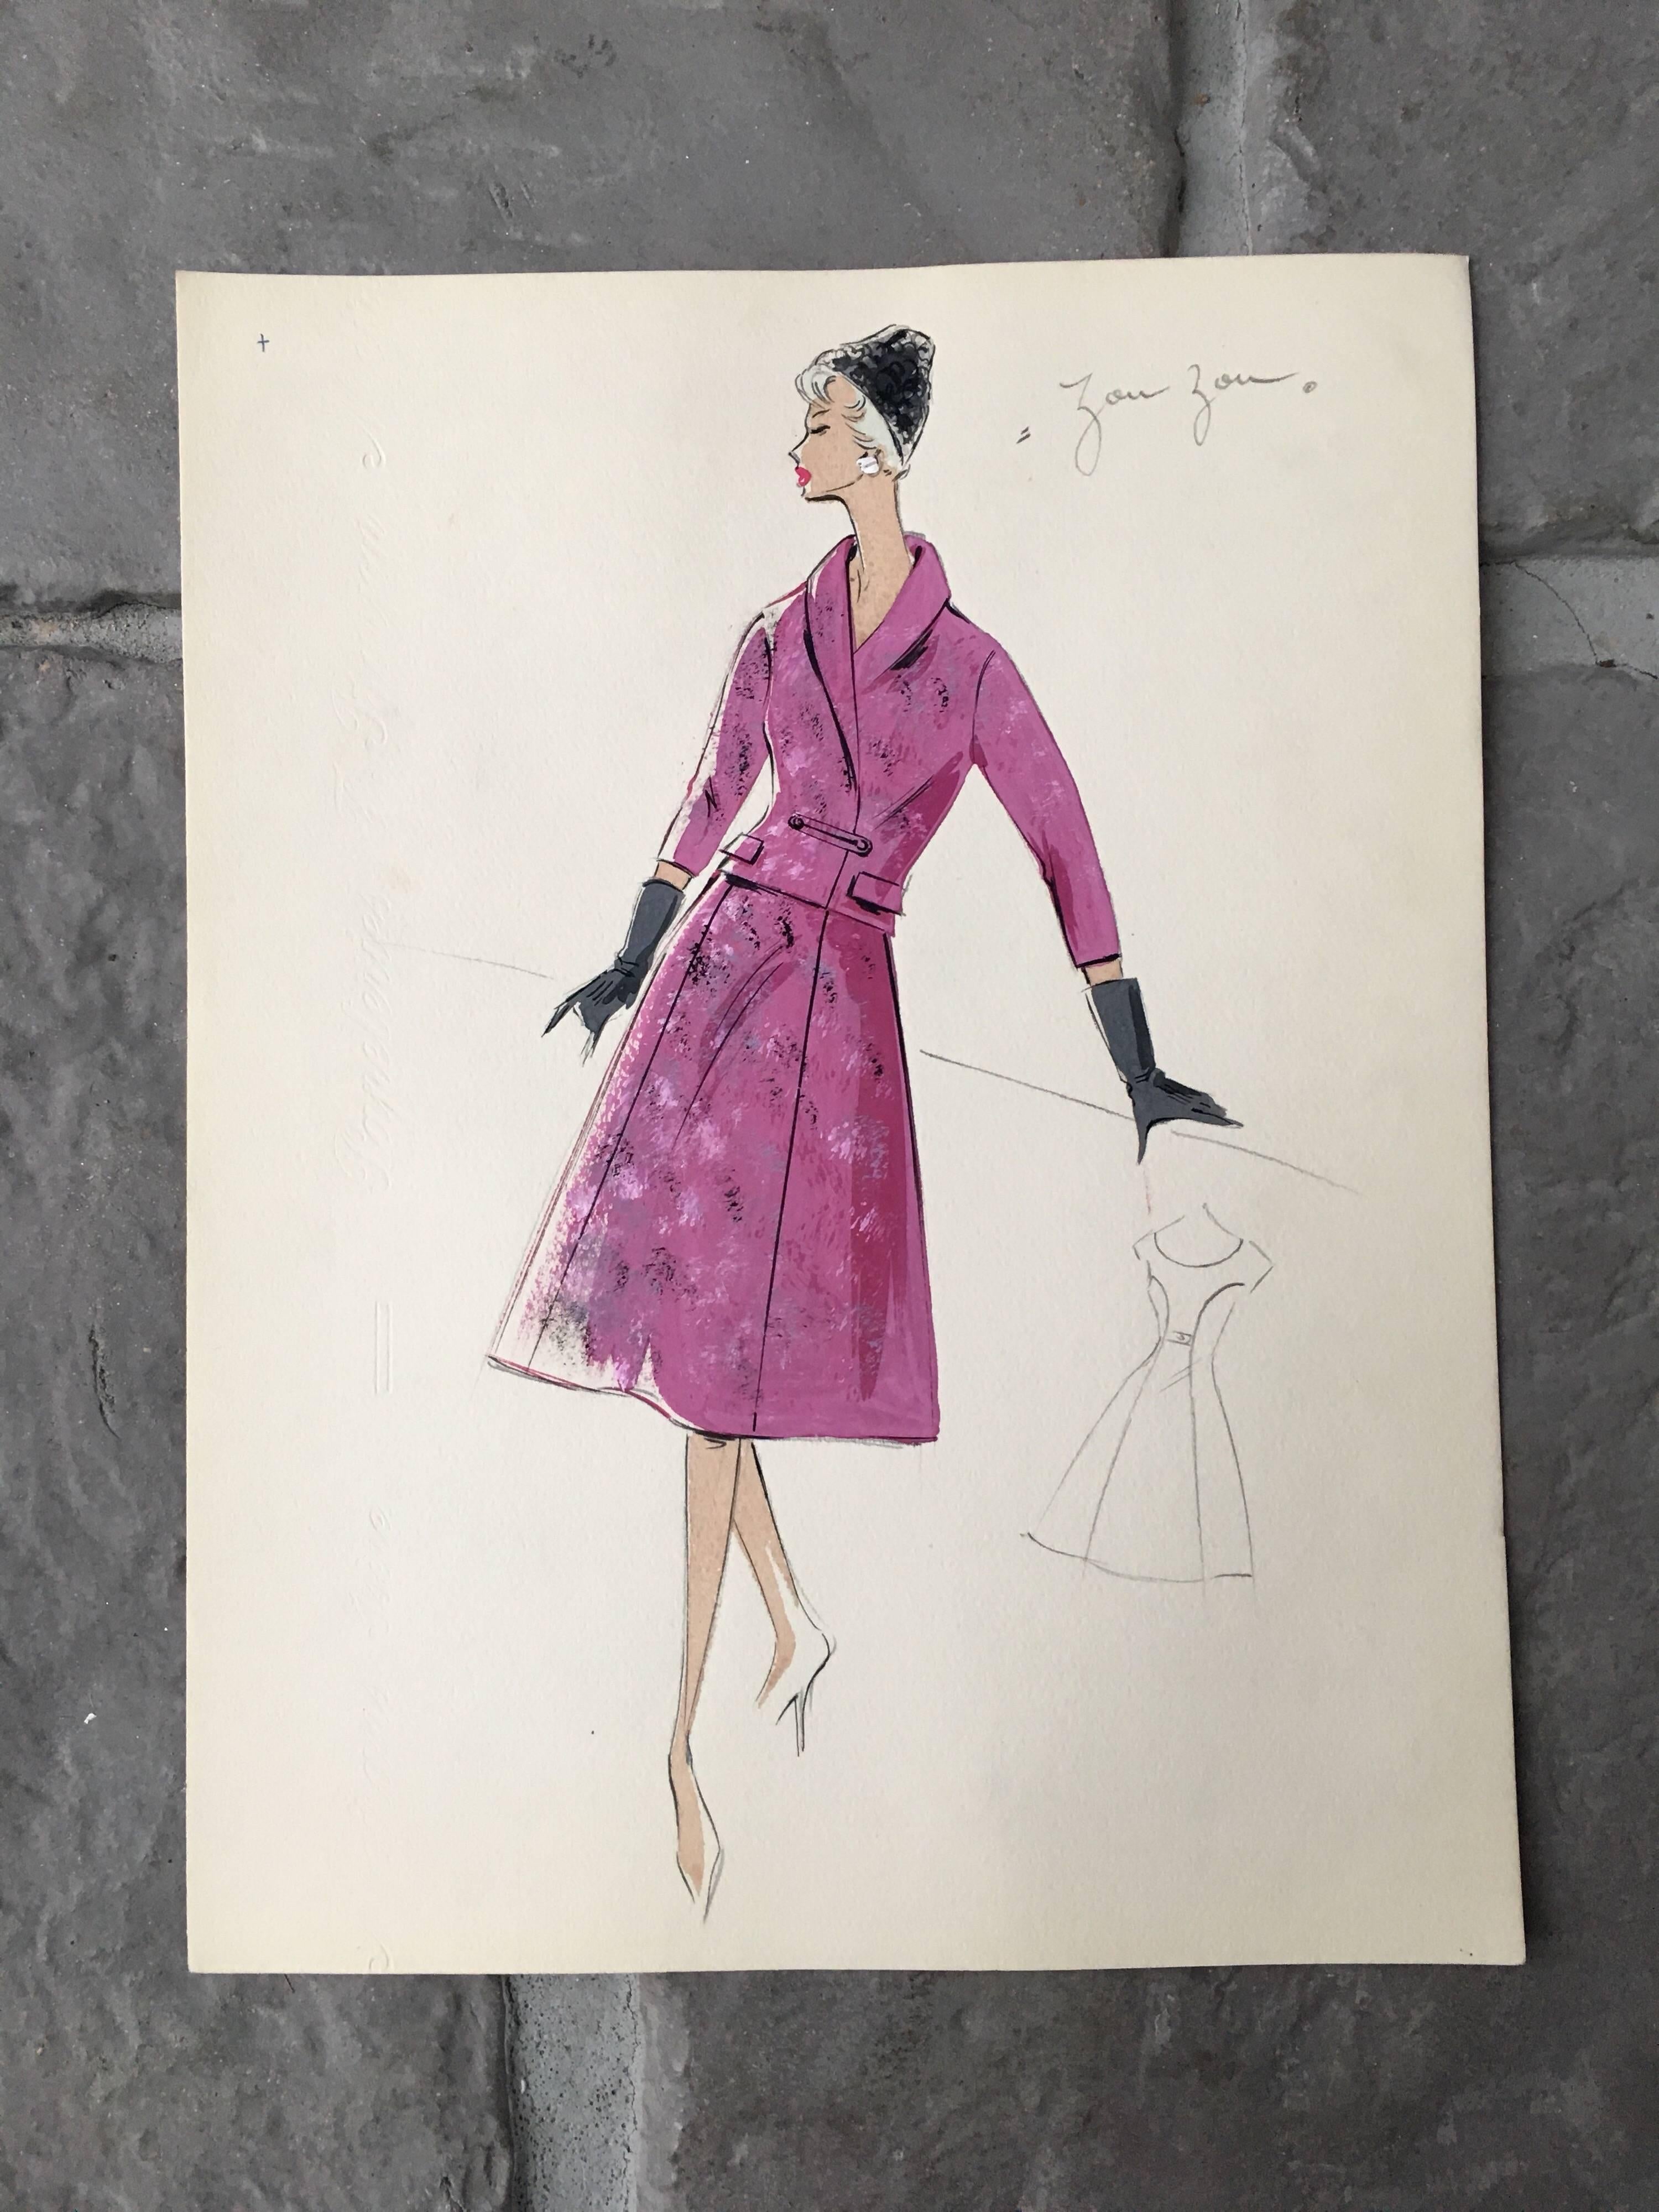 Lady in Pink 1950's Two Piece Parisian Fashion Illustration Sketch - Painting by Unknown